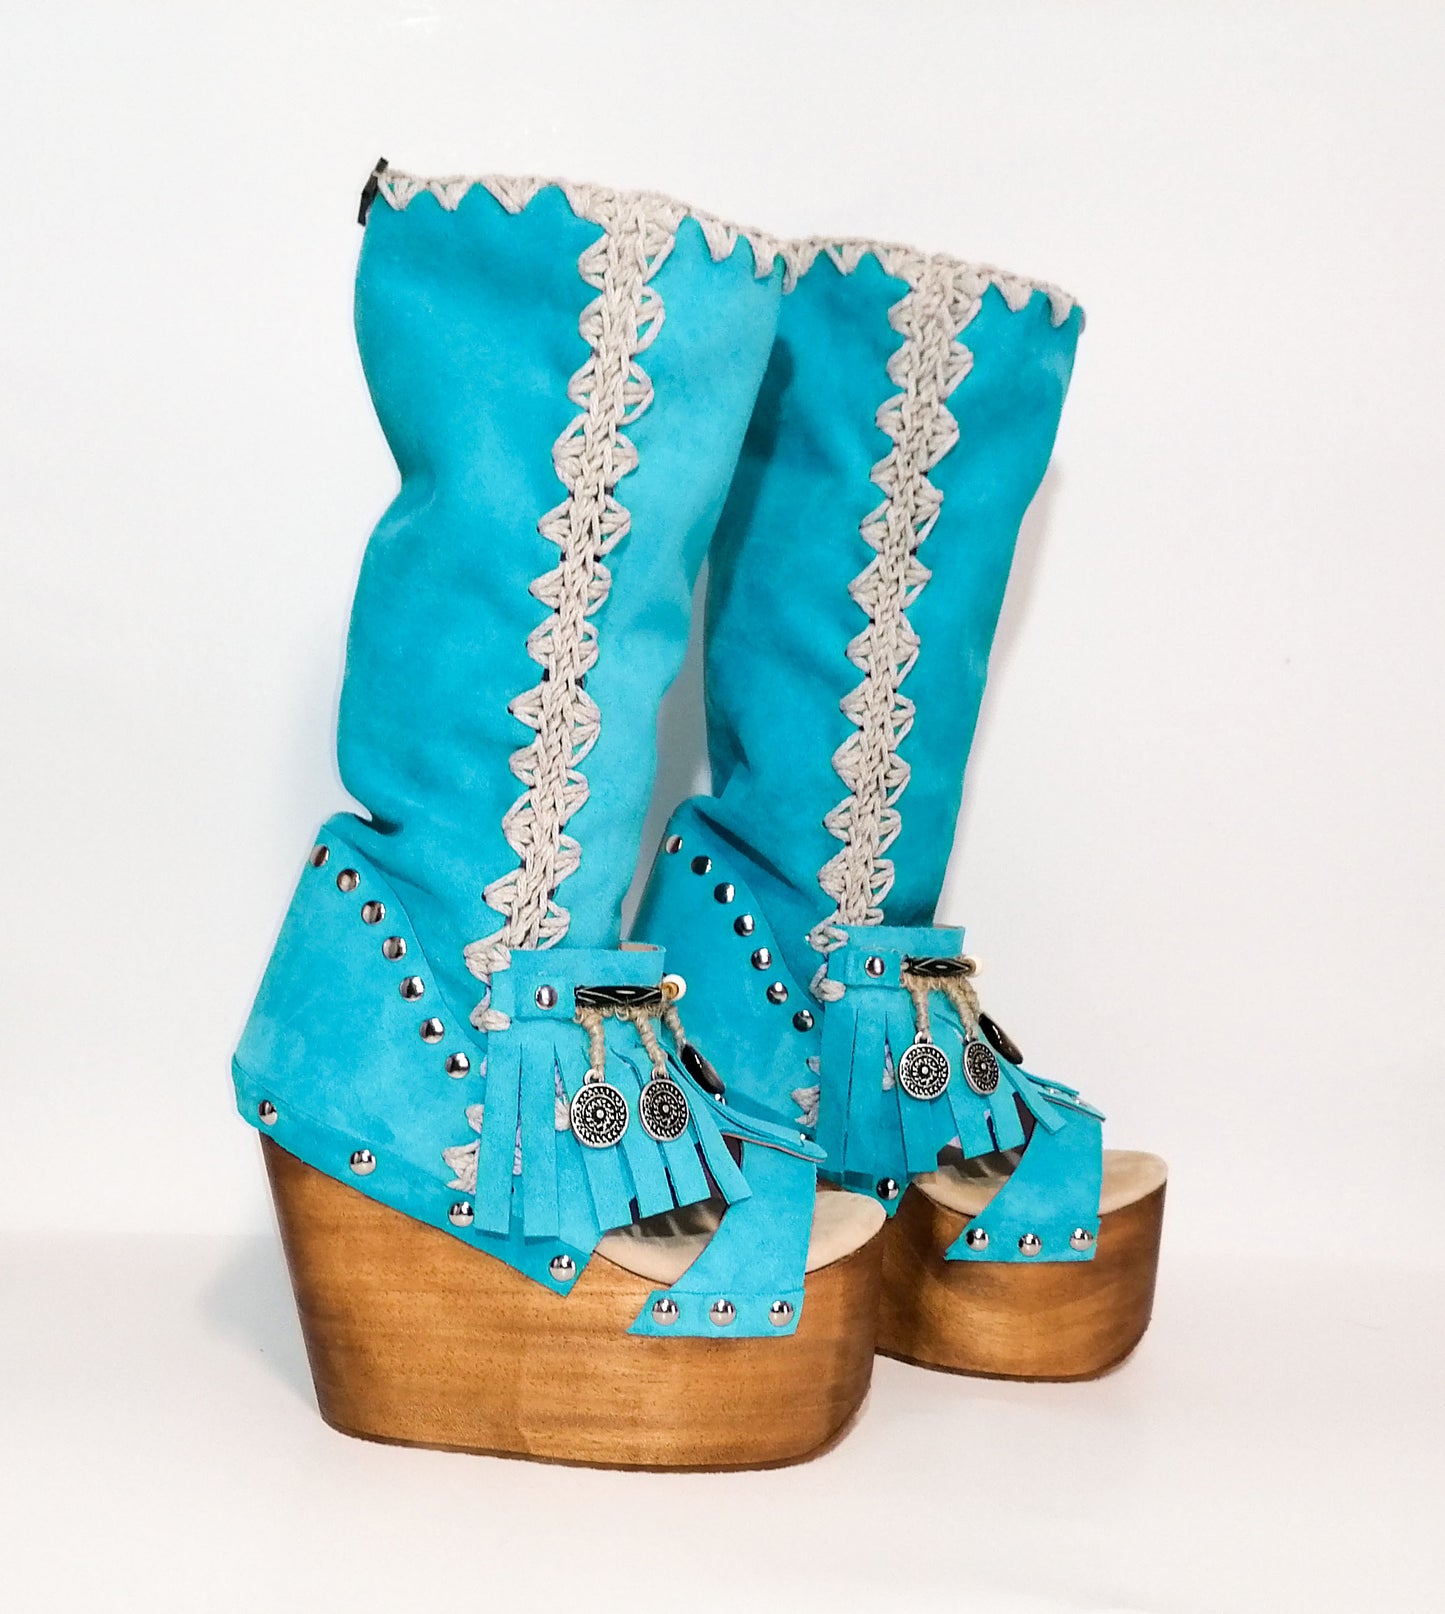 Turquoise wooden wedge boot. Bohemian style boot decorated with shells and coins. Wooden wedge boot. Wooden wedge sandal. Sizes 34 to 47. High quality handmade leather shoes by sol Caleyo. Sustainable fashion.